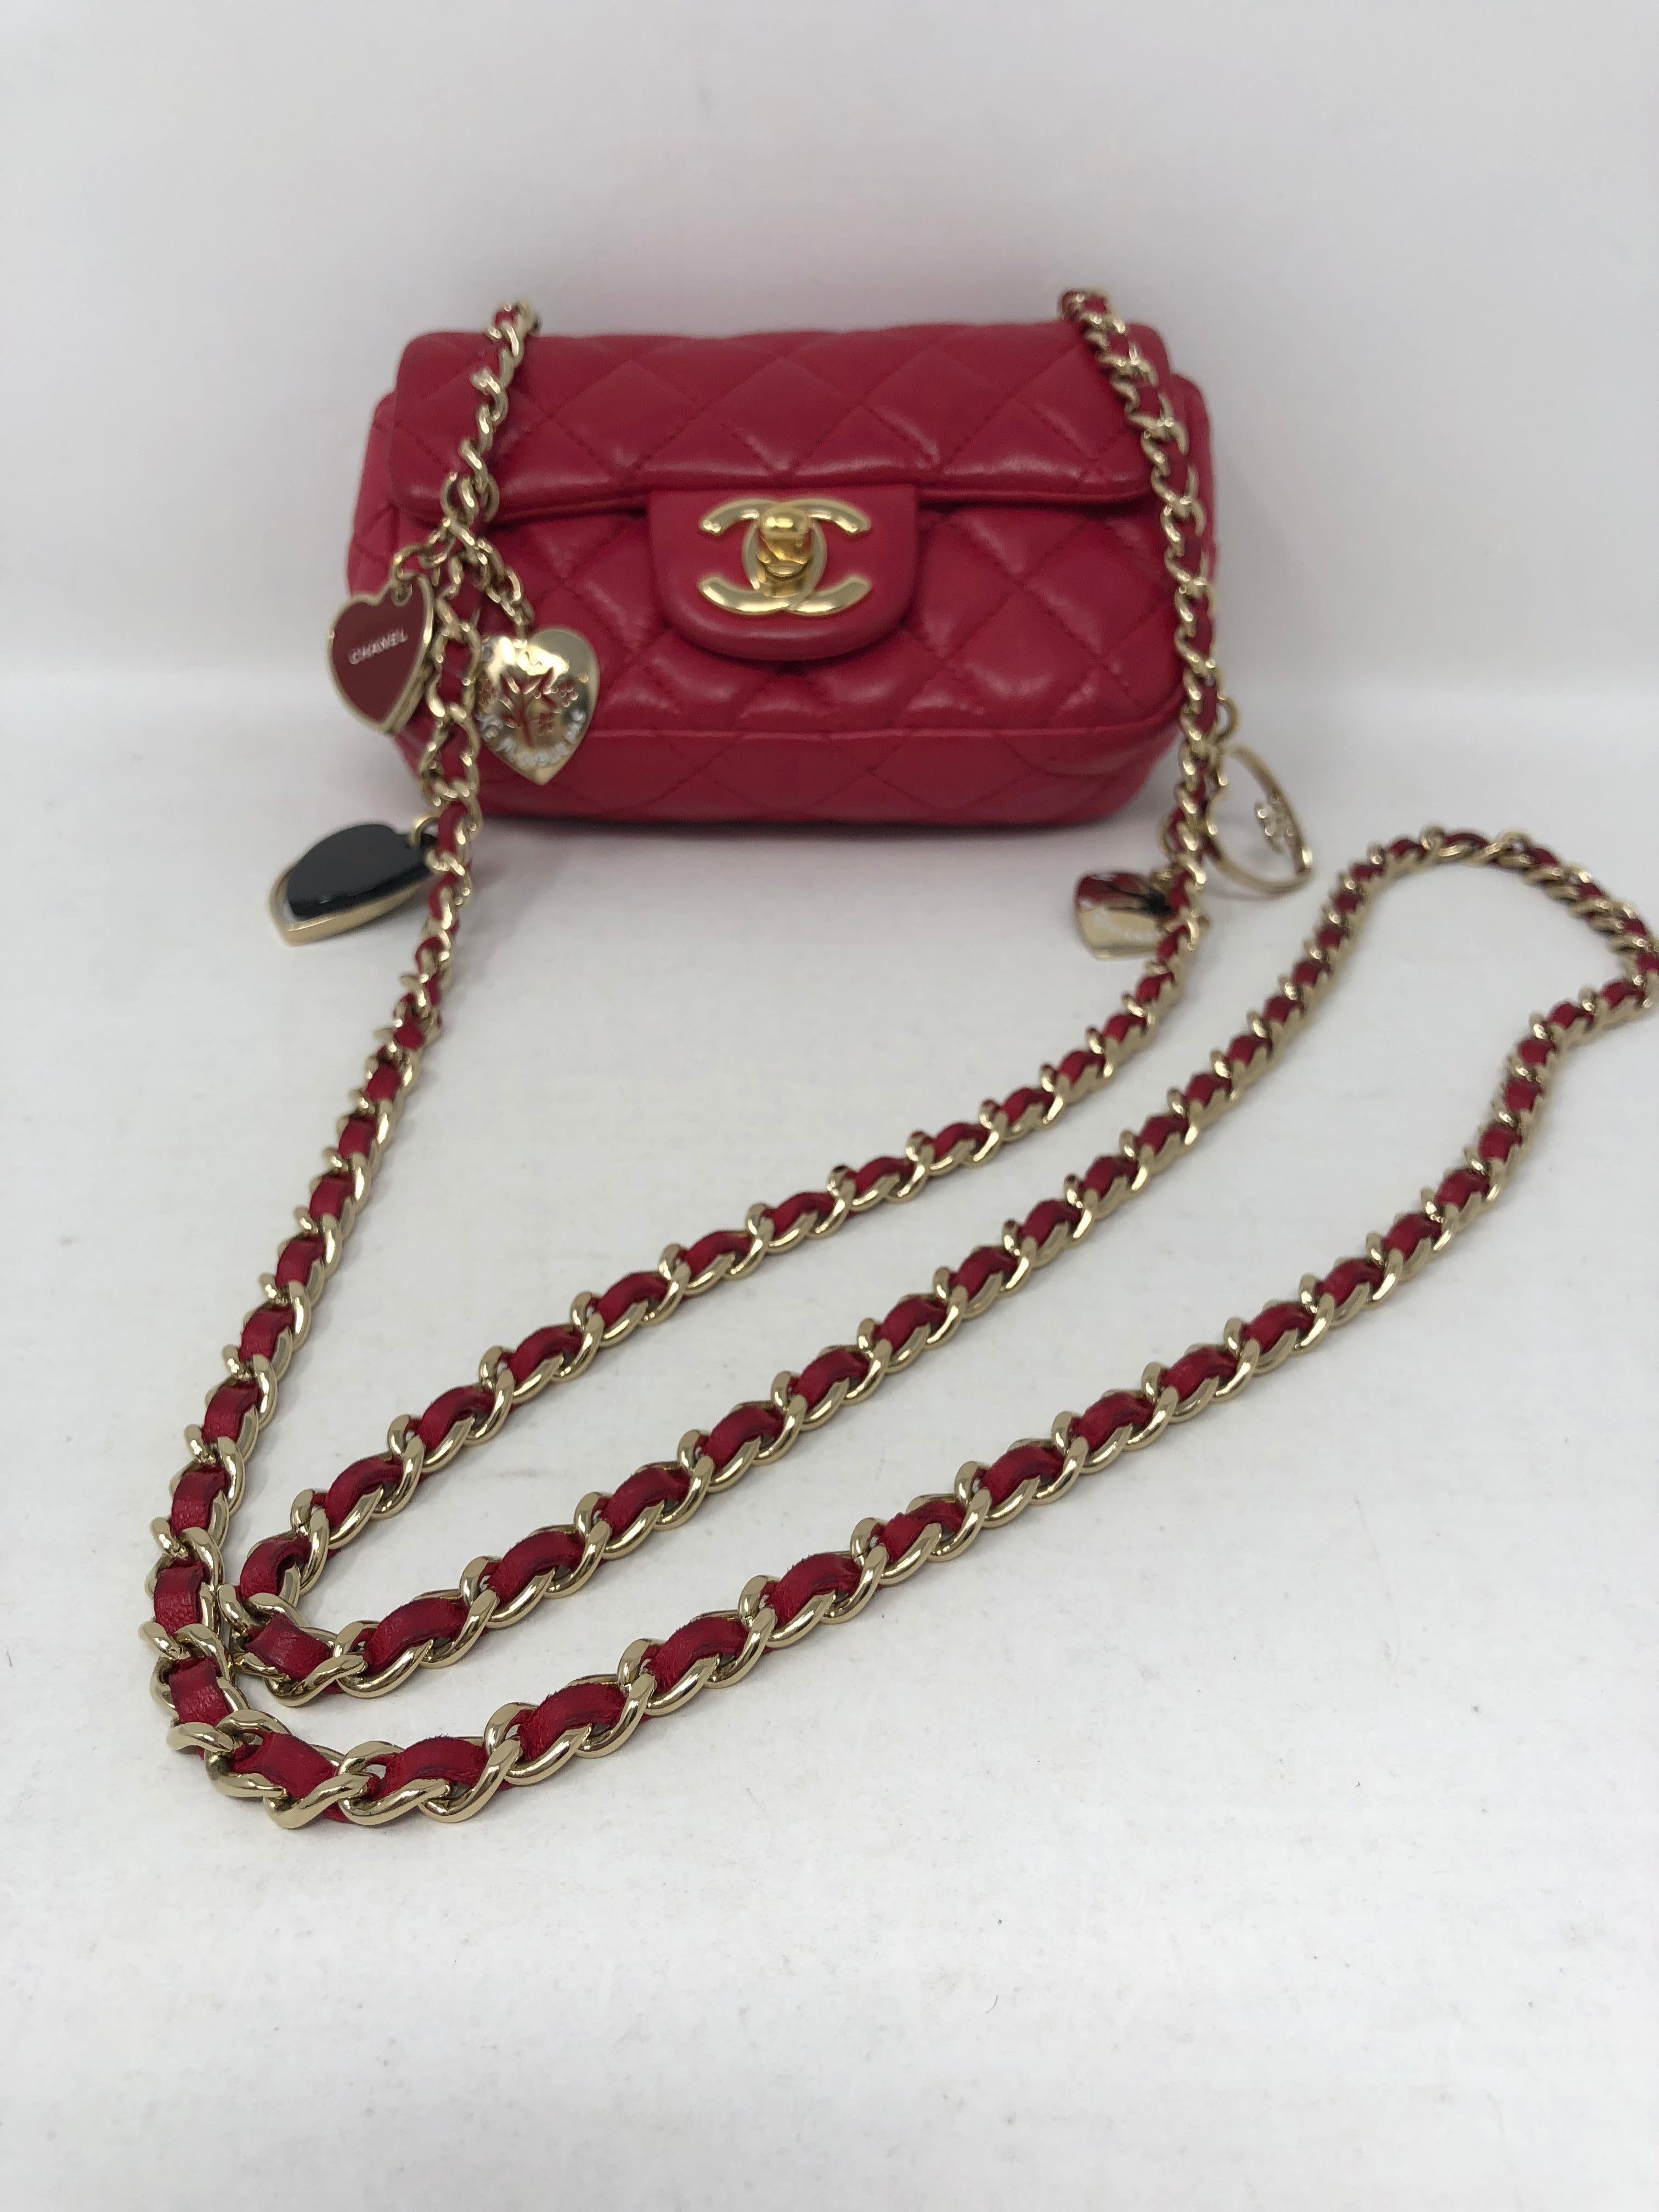 Chanel Extra Mini Crossbody with Chanel charms. Hearts on gold hardware. Whimsical cute bag can be worn crossbody. Good condition. Limited collection. Tiny enough to be worn to Football games. Own this sweet Chanel. Guaranteed authentic. 